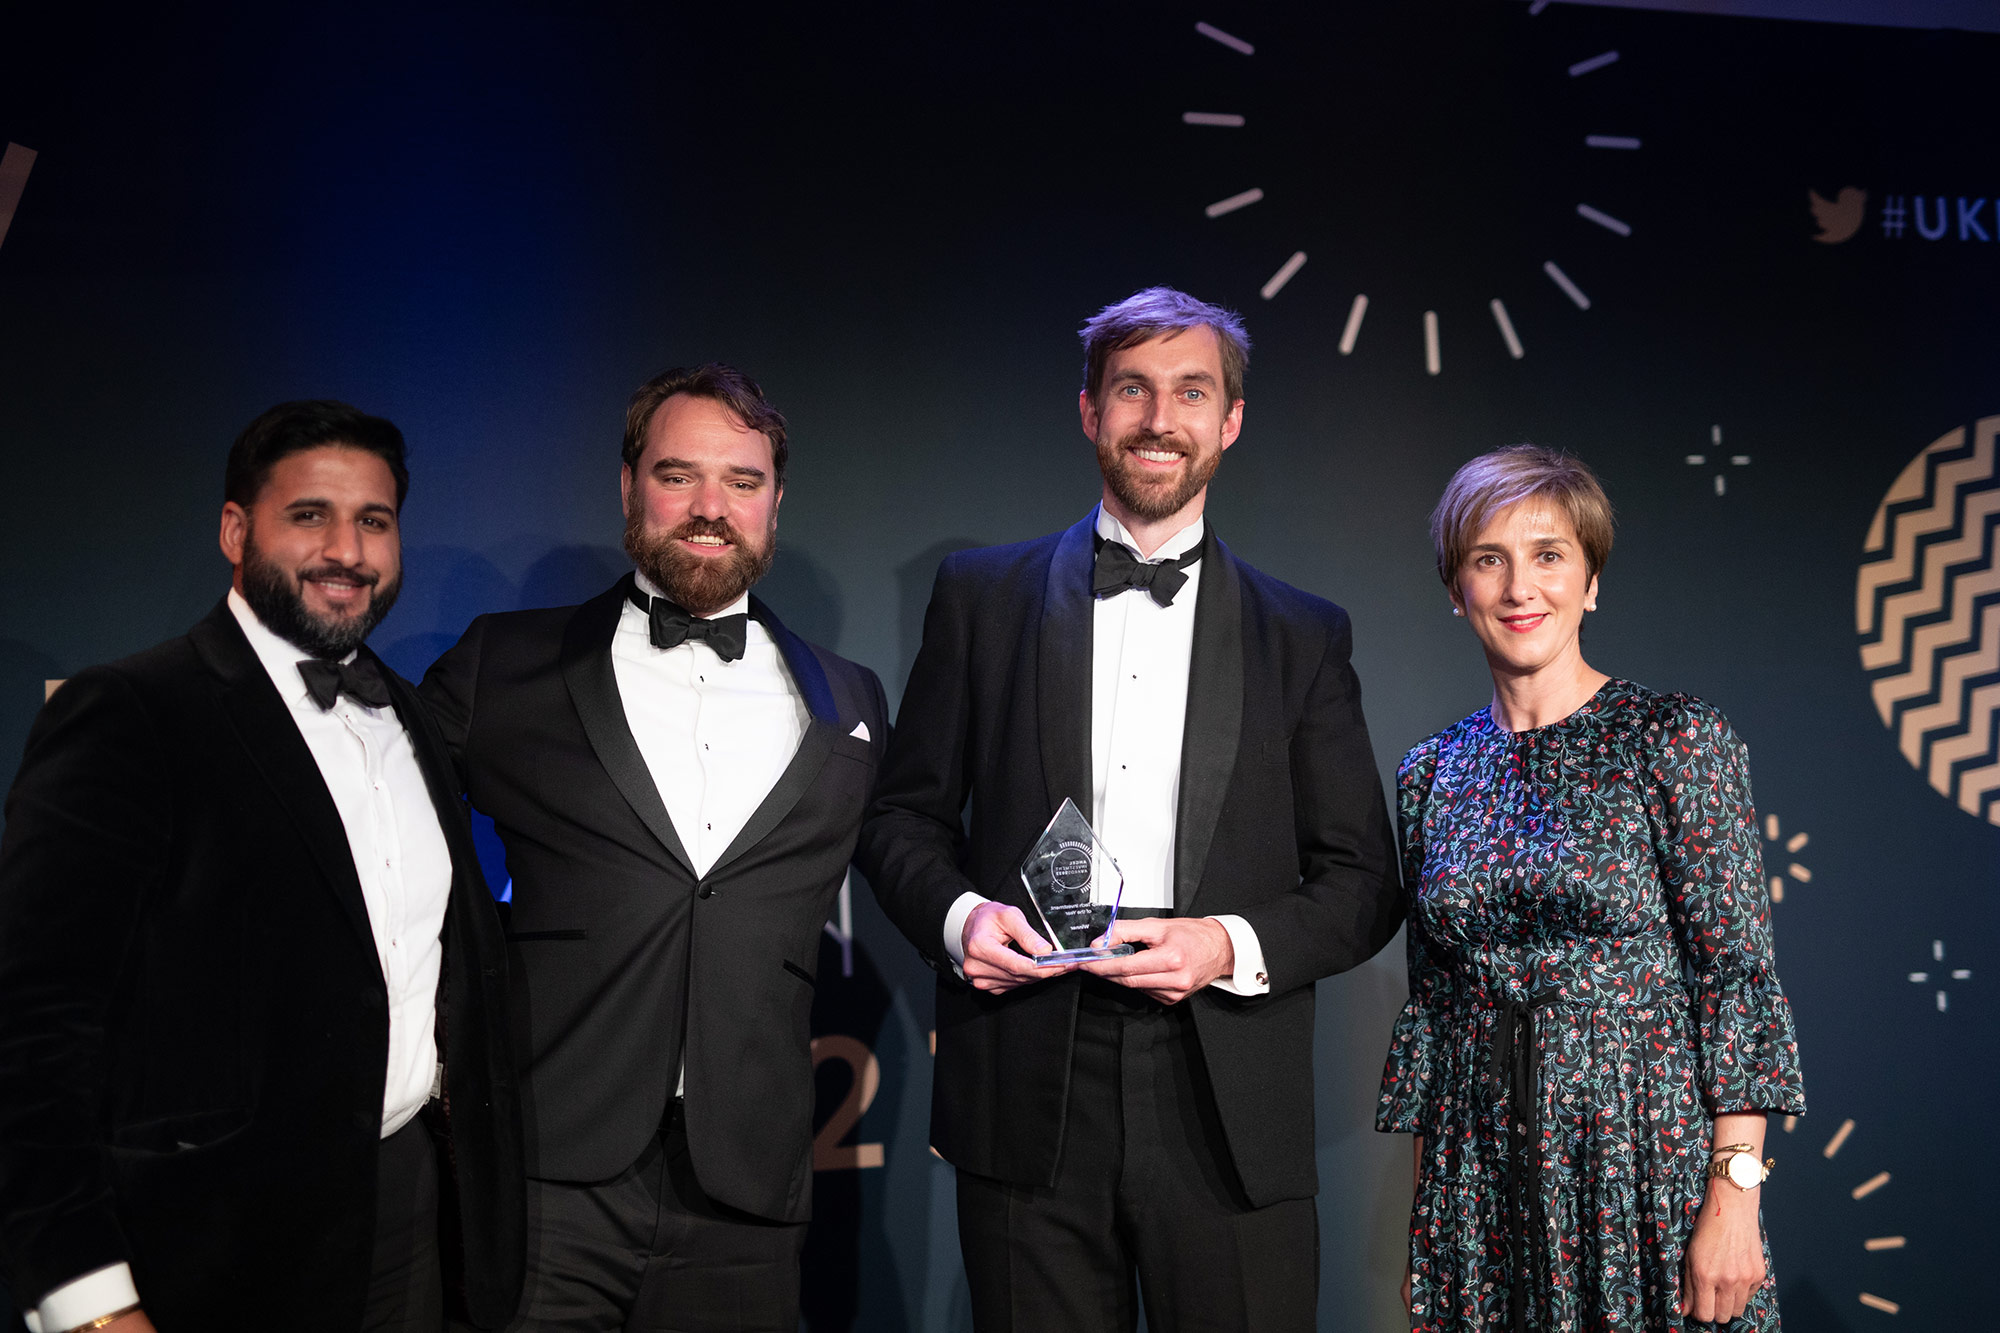 Twig wins UKBAA Deep Tech Investment of the Year